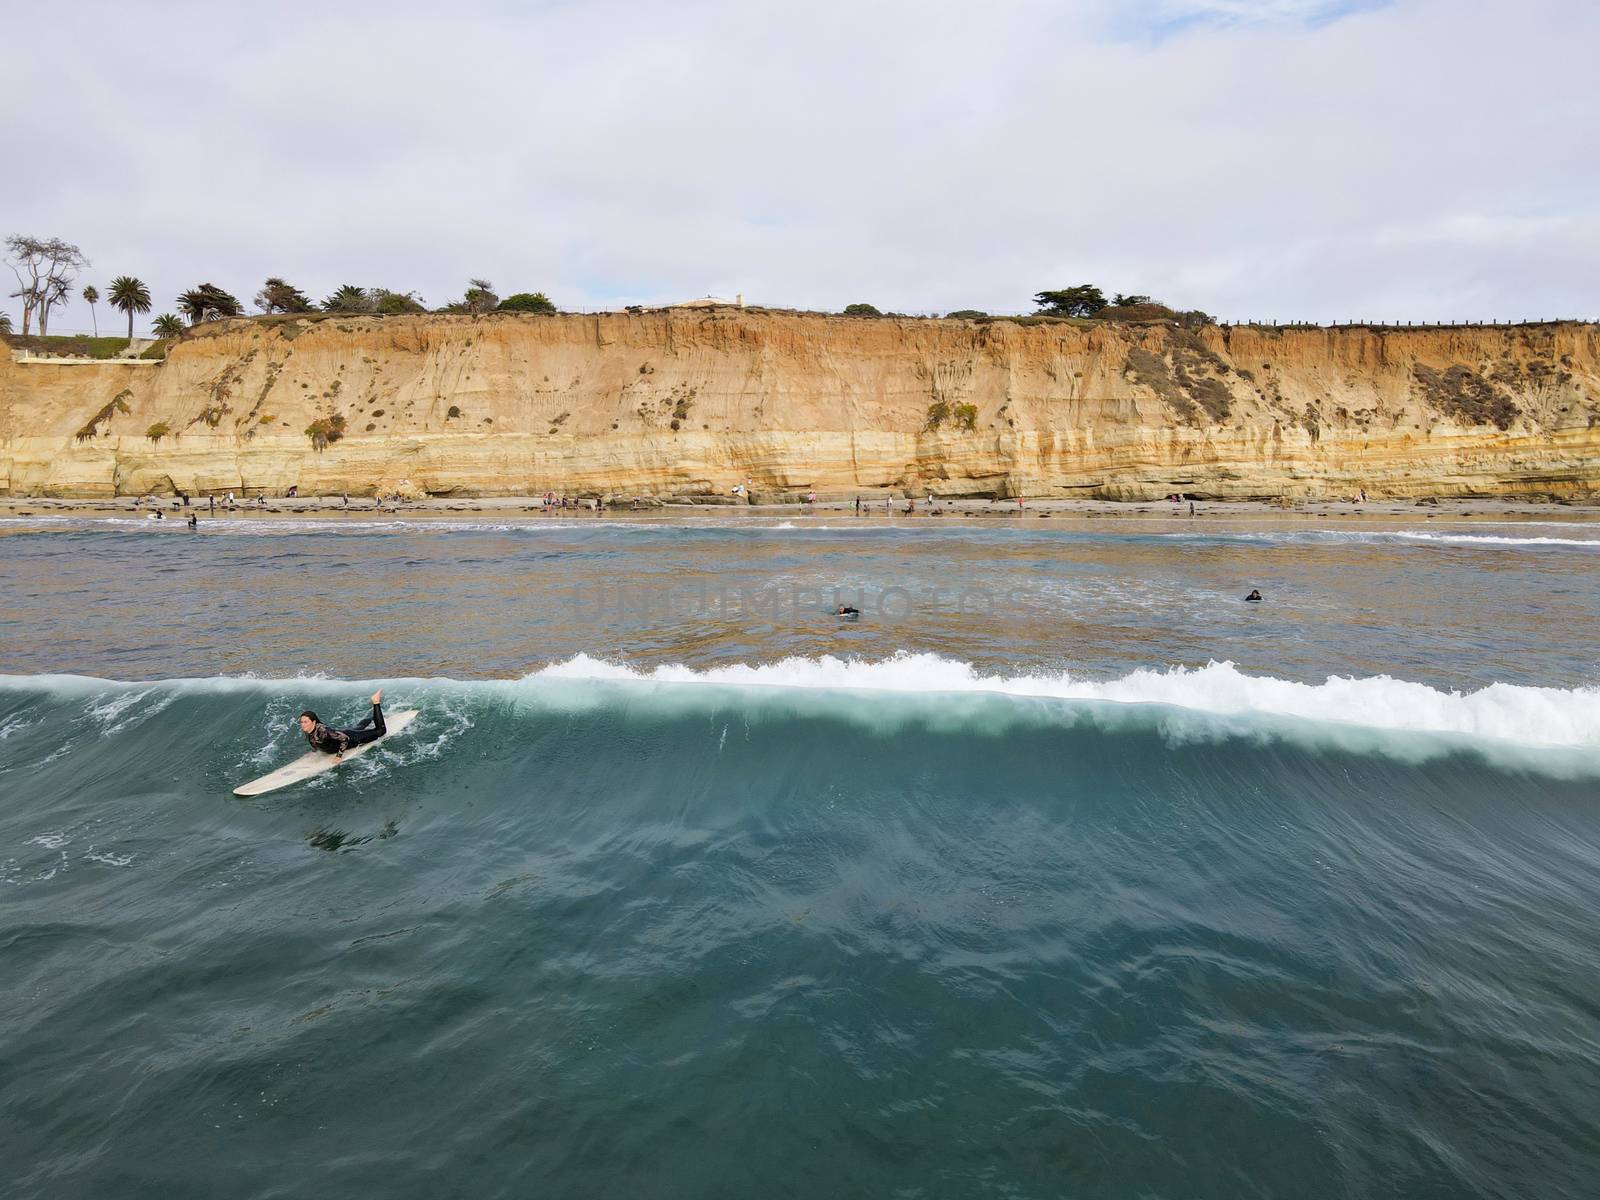 Surfers with wet suit paddling and enjoying the big waves. San Diego, California, USA by Bonandbon